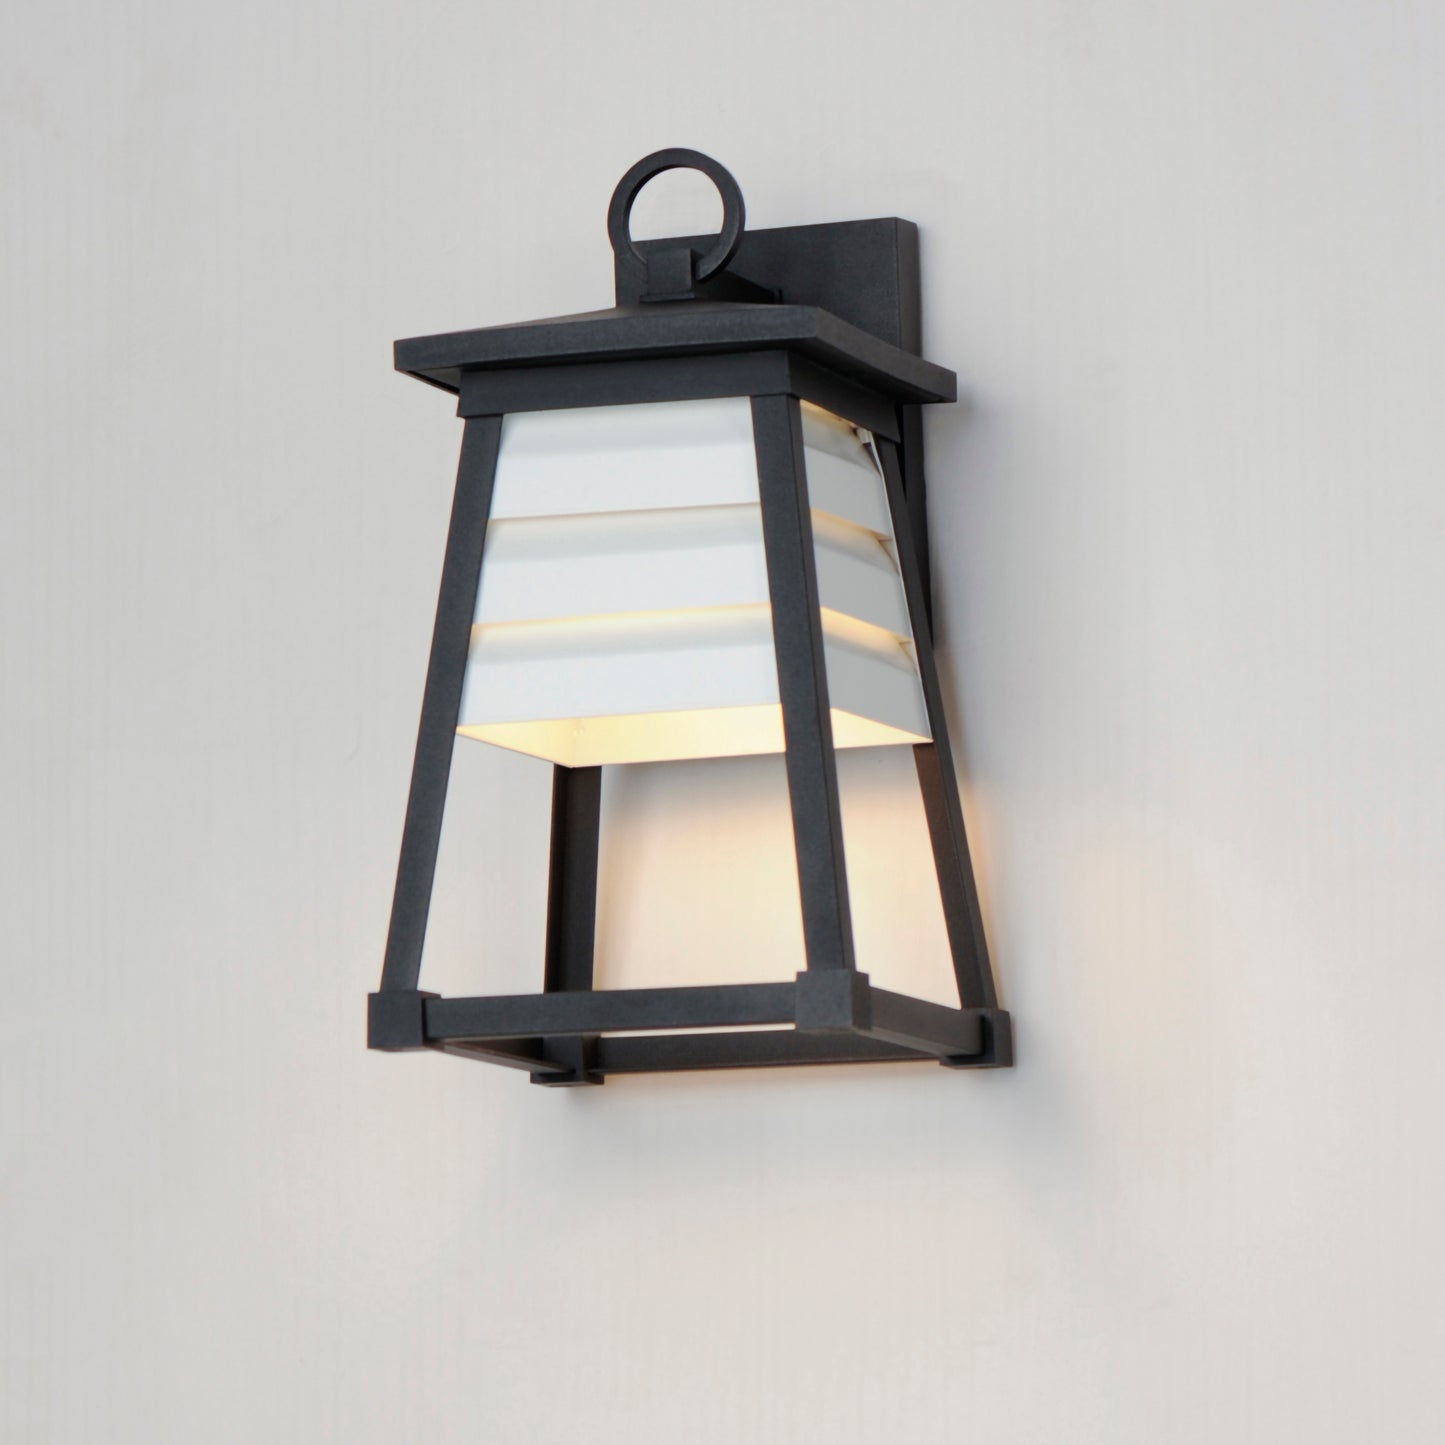 40632WTBK - Shutters 14" Outdoor Wall Sconce - Black